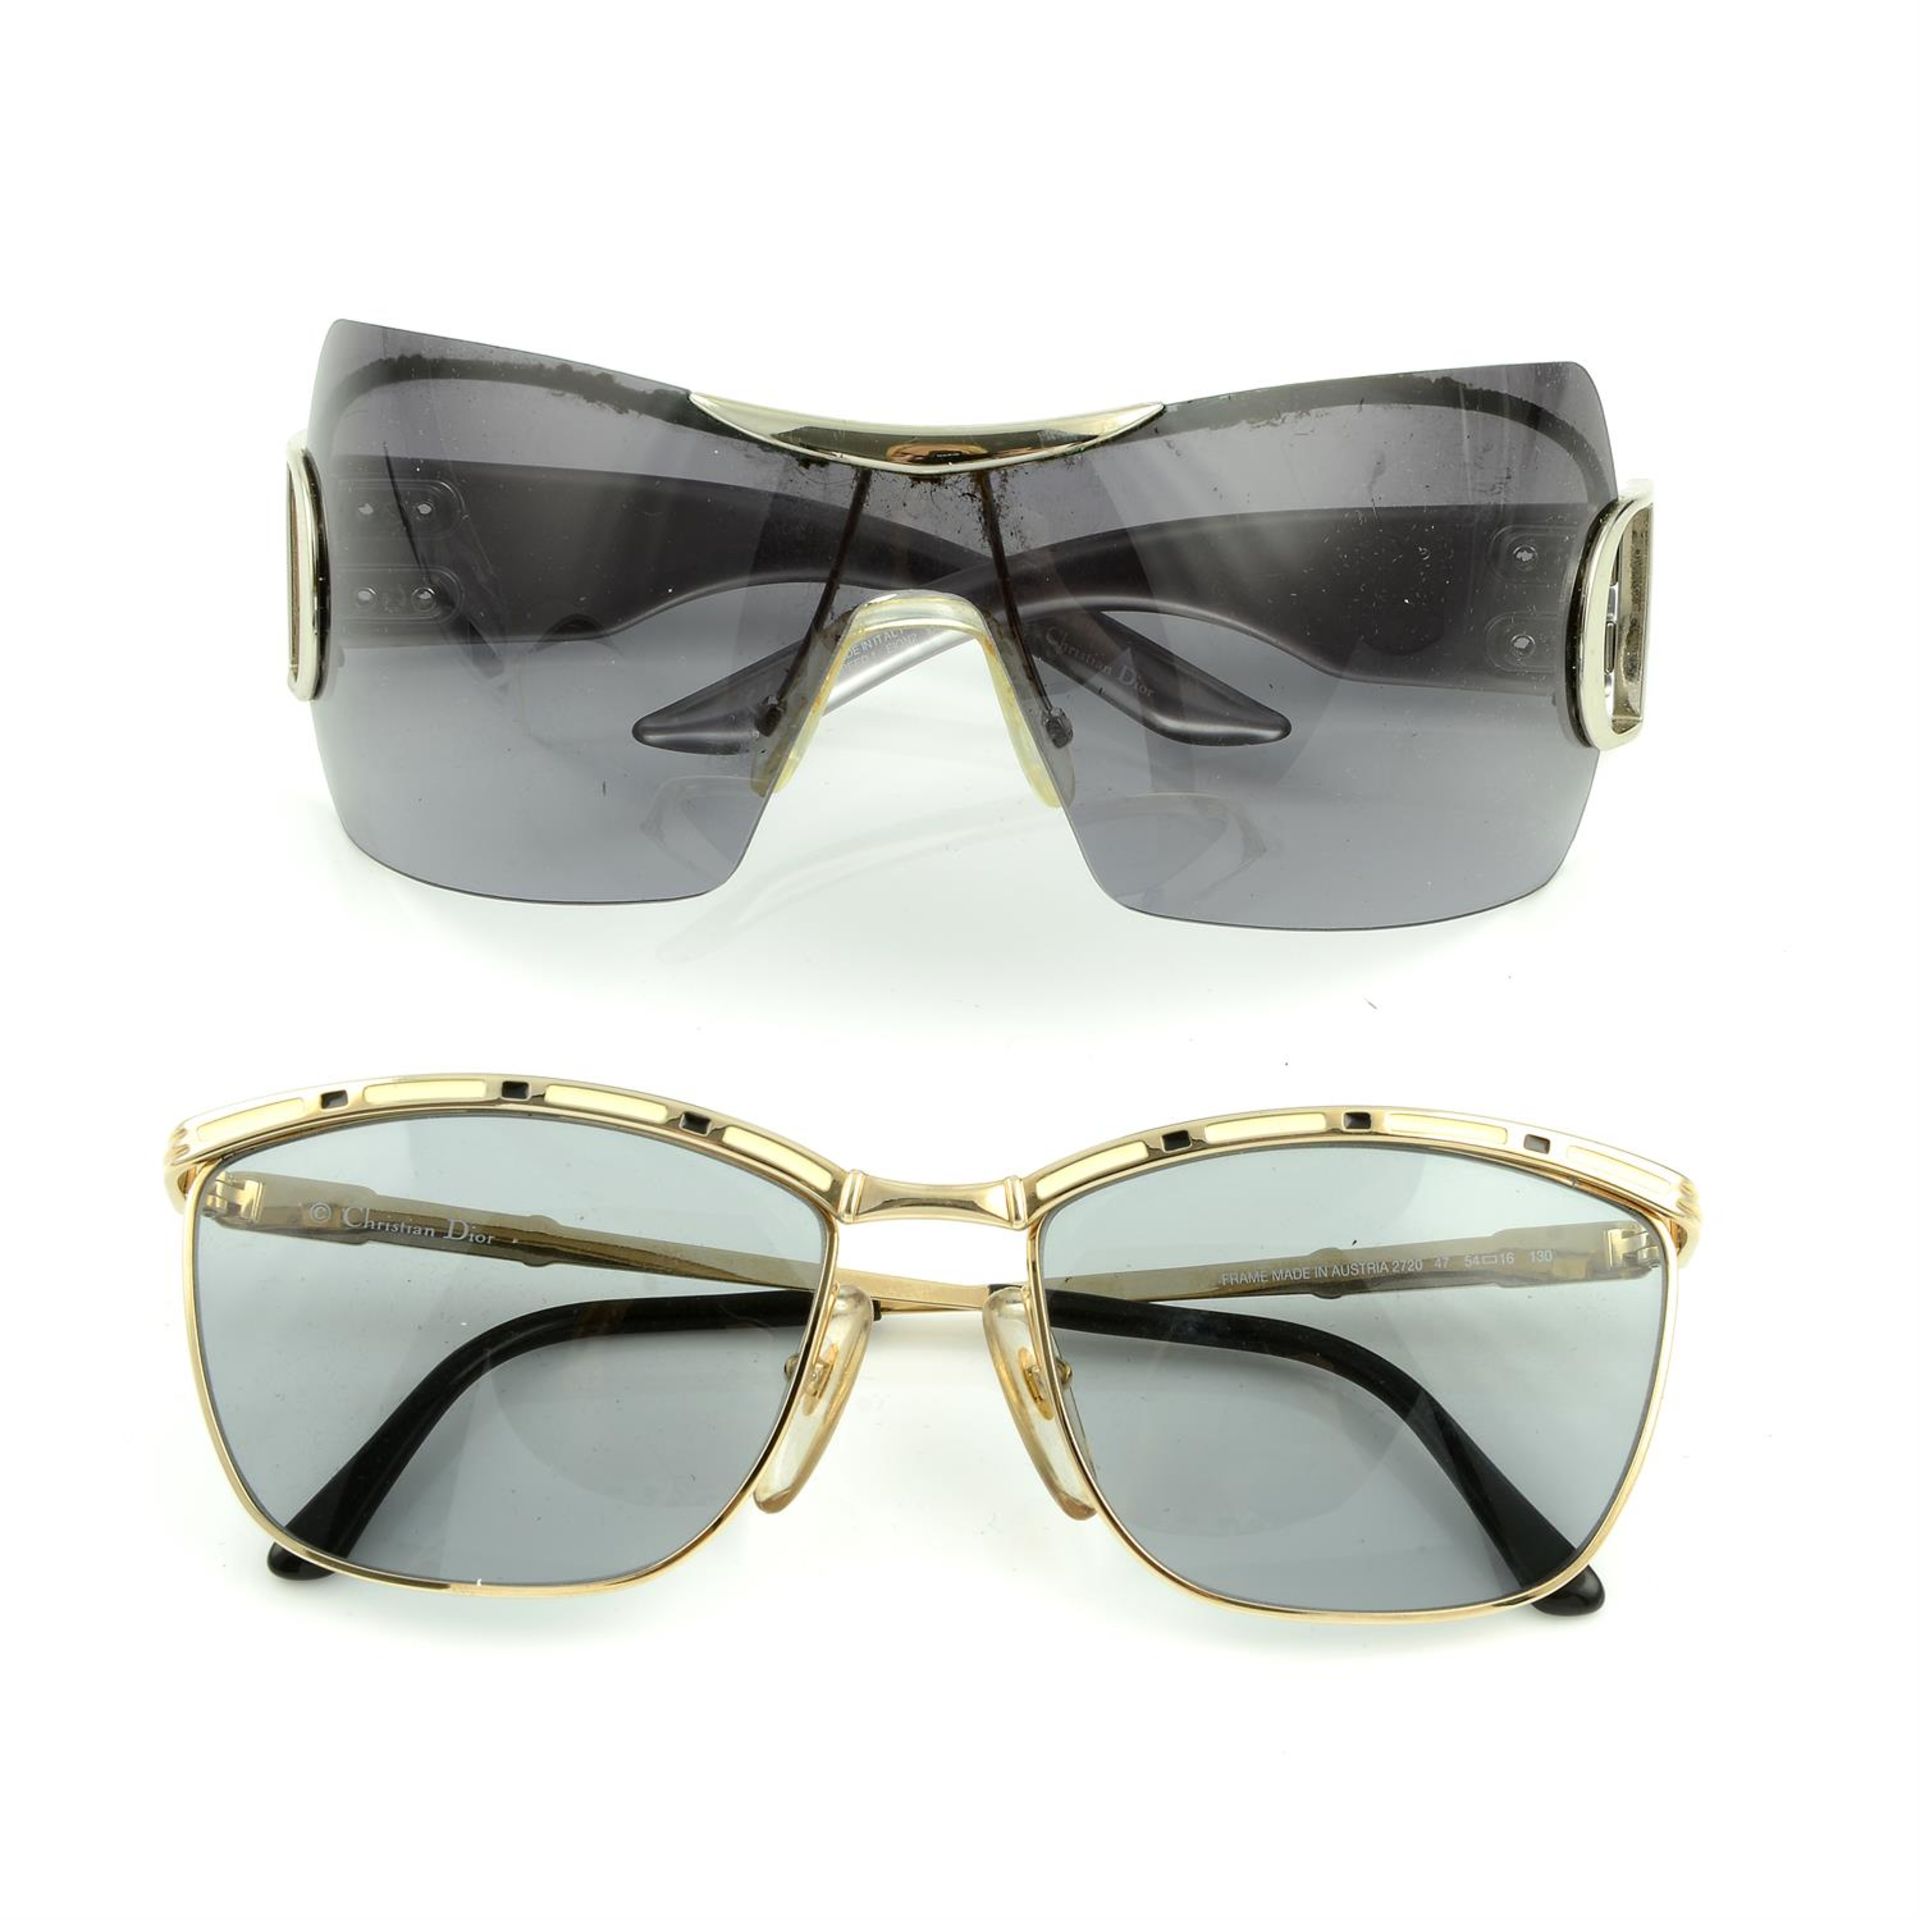 CHRISTIAN DIOR - two pairs of sunglasses.